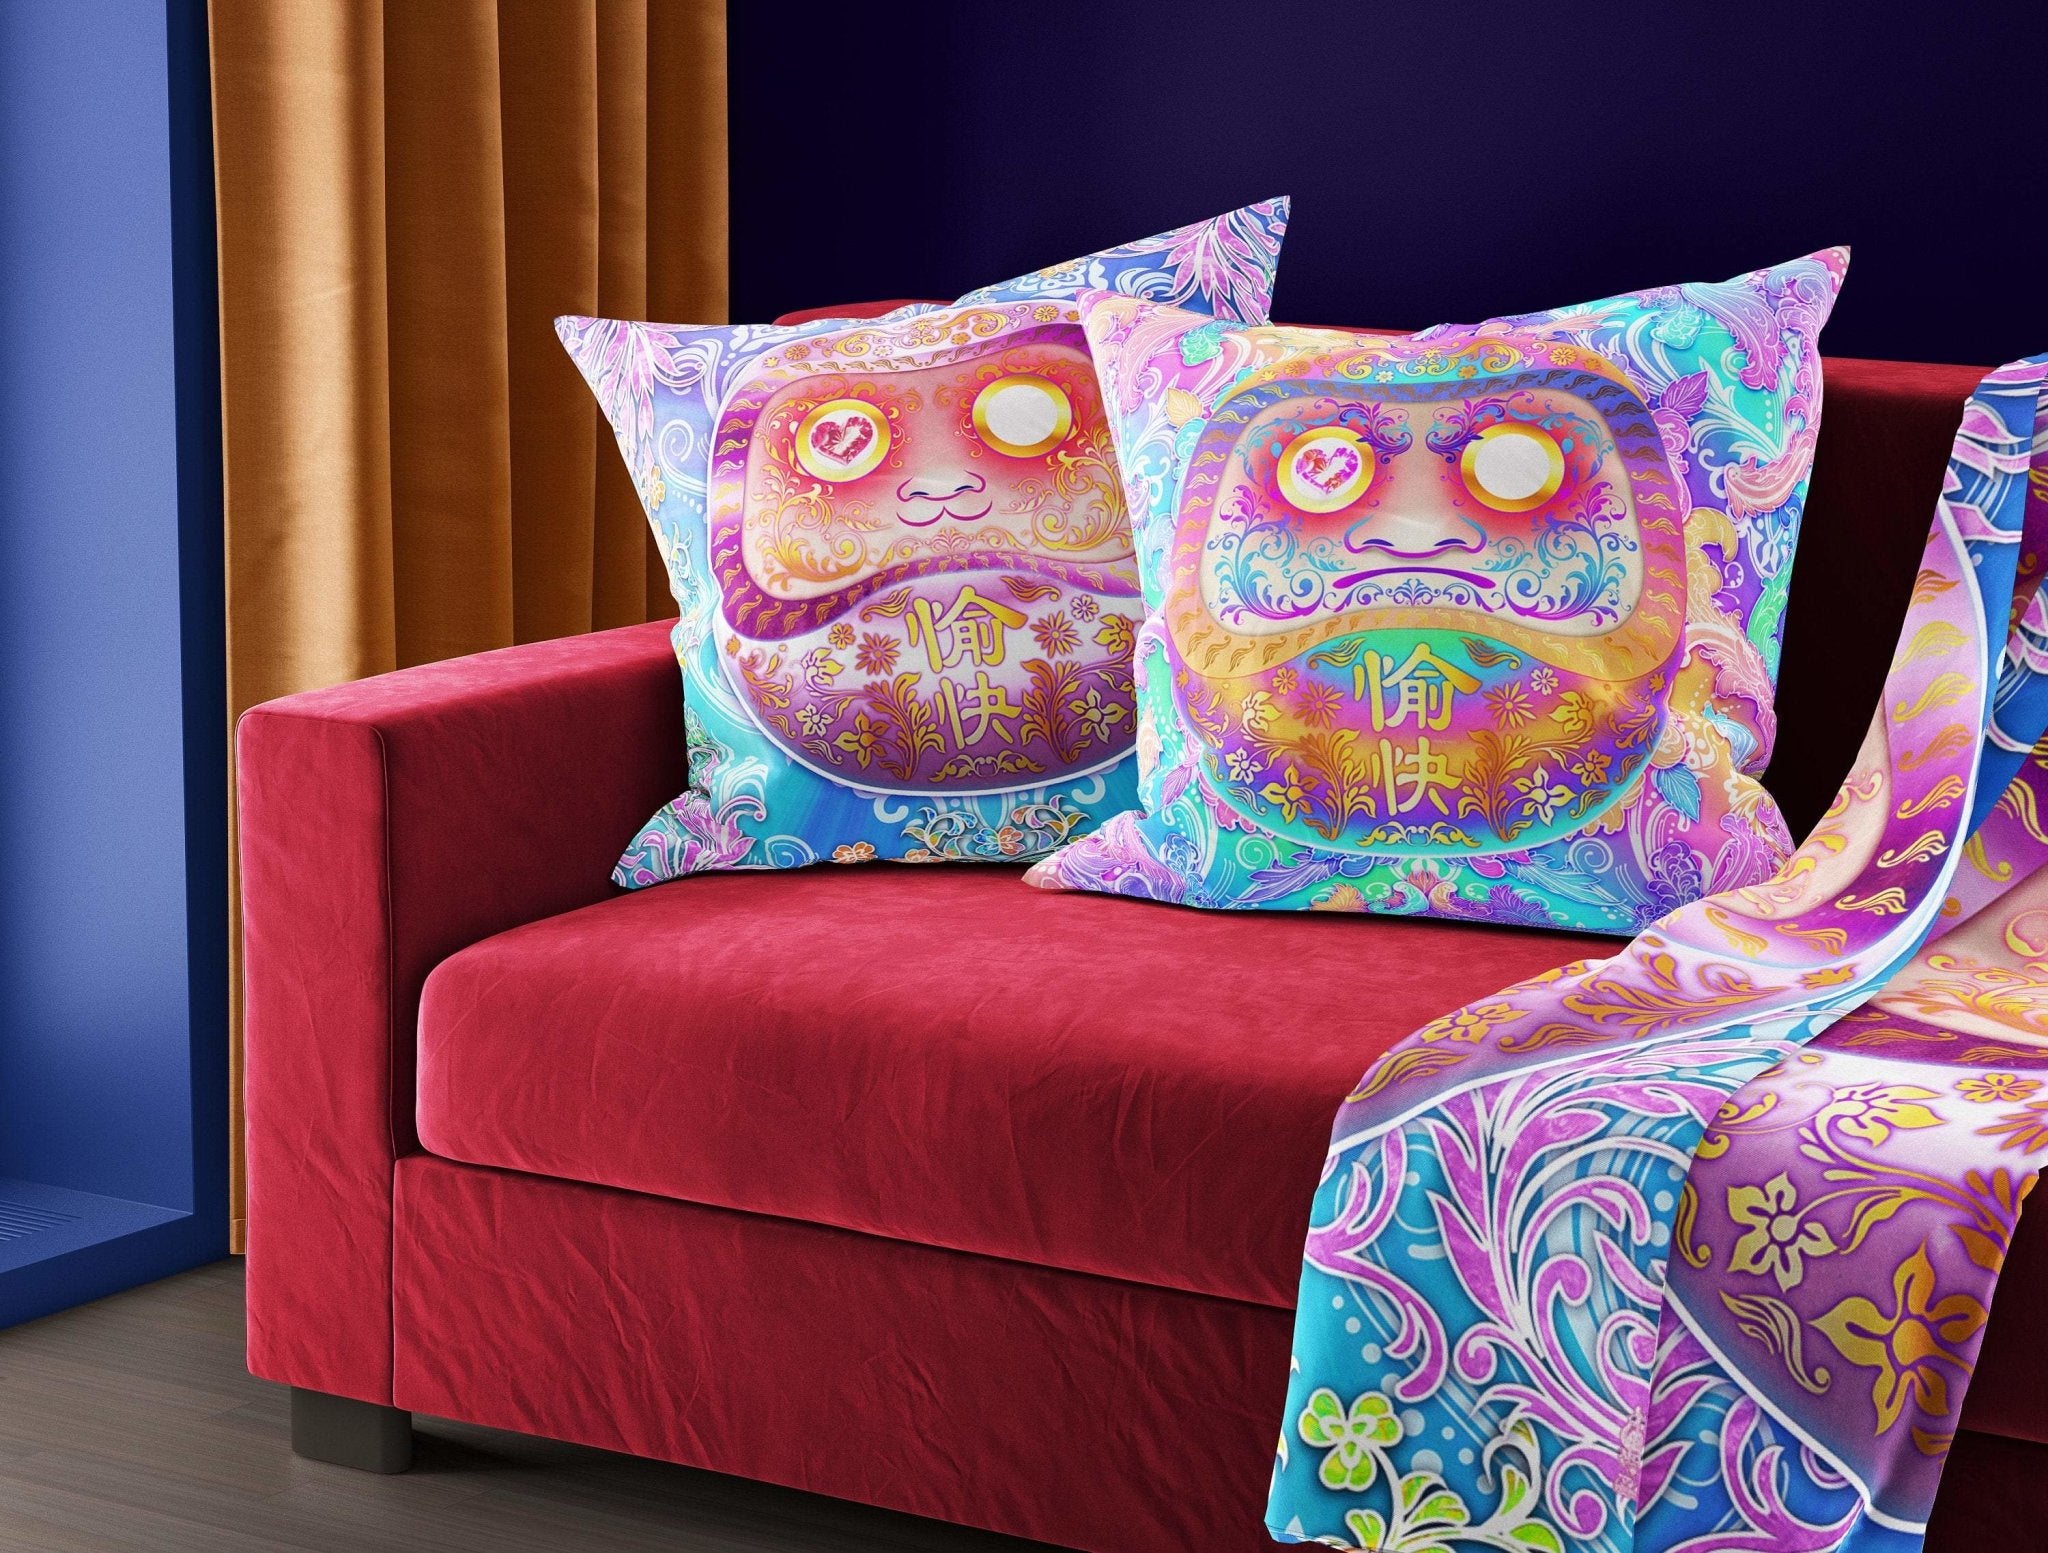 Kawaii Throw Pillow, Decorative Accent Cushion, Japanese Anime and Girl Gamer Room Decor, Funky and Eclectic Home - Daruma, Holographic - Abysm Internal